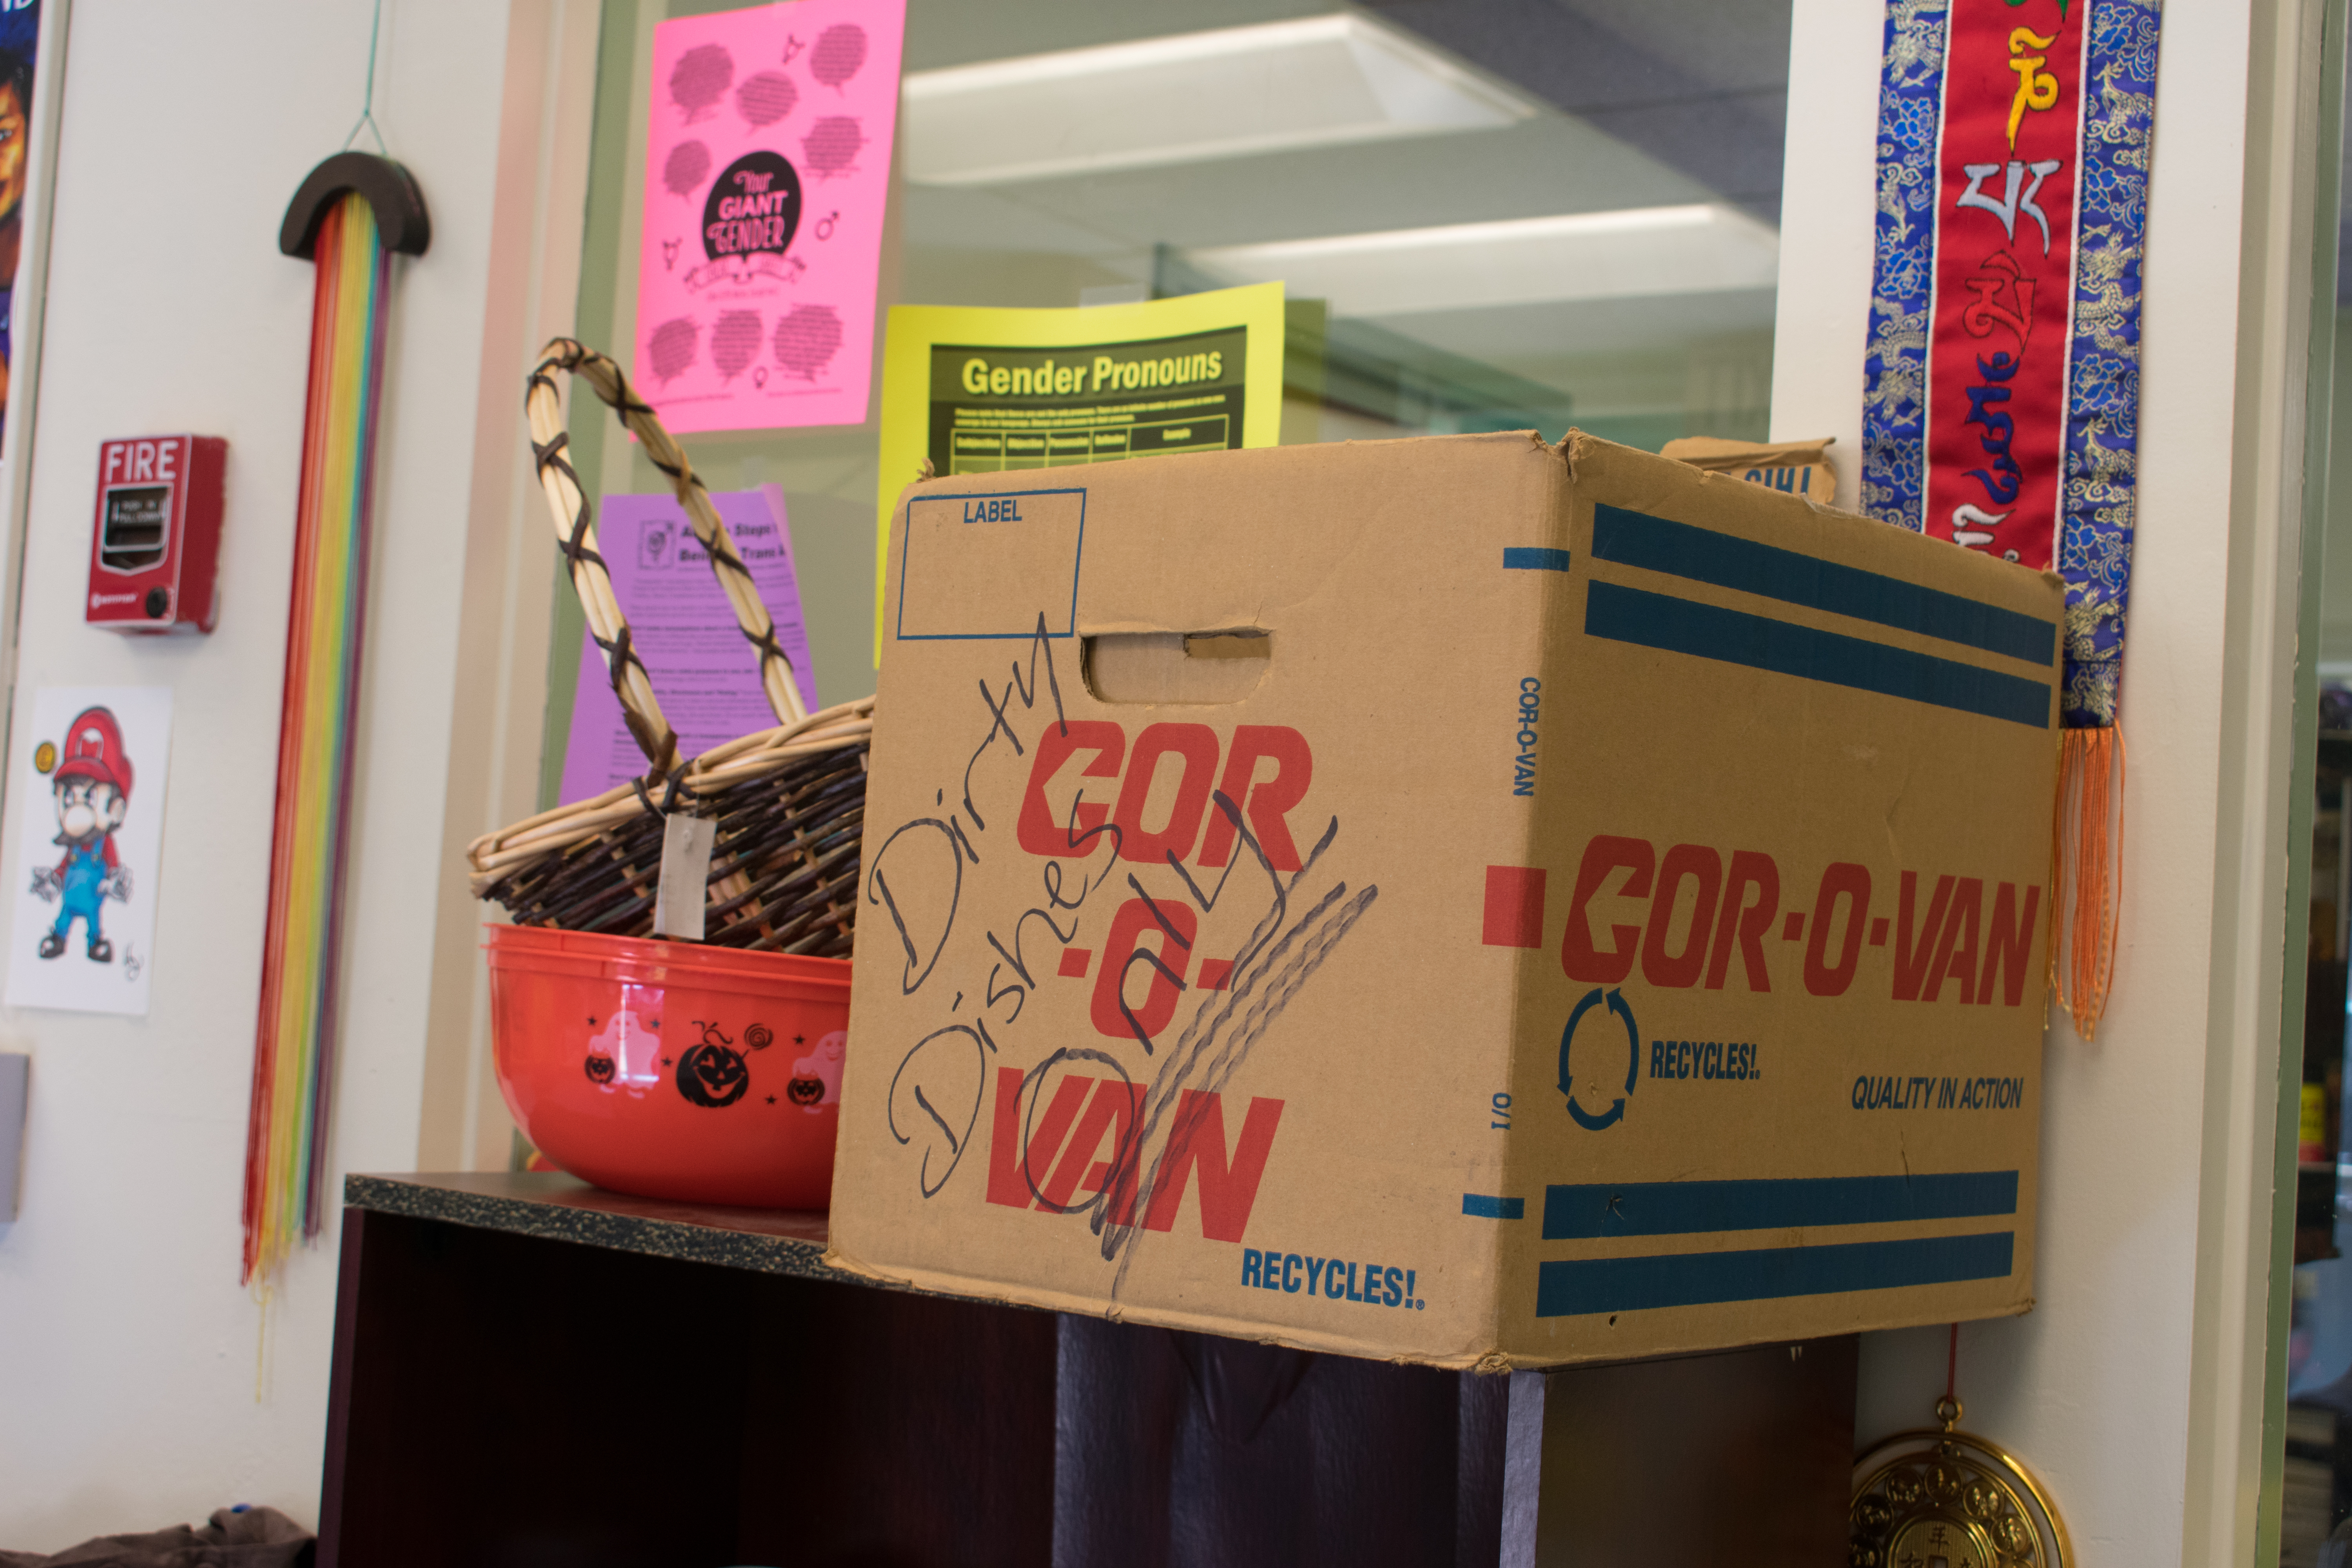 Free snacks and bowls of soup are offered to students at the Queer Resource Center, and dishes are collected in this box due to no kitchens or sinks being available. October 7, 2017. The staff collects the dishes and takes them home to be washed in his/her personal dishwasher. San Francisco. (AP Photo/ Julia Fuller)